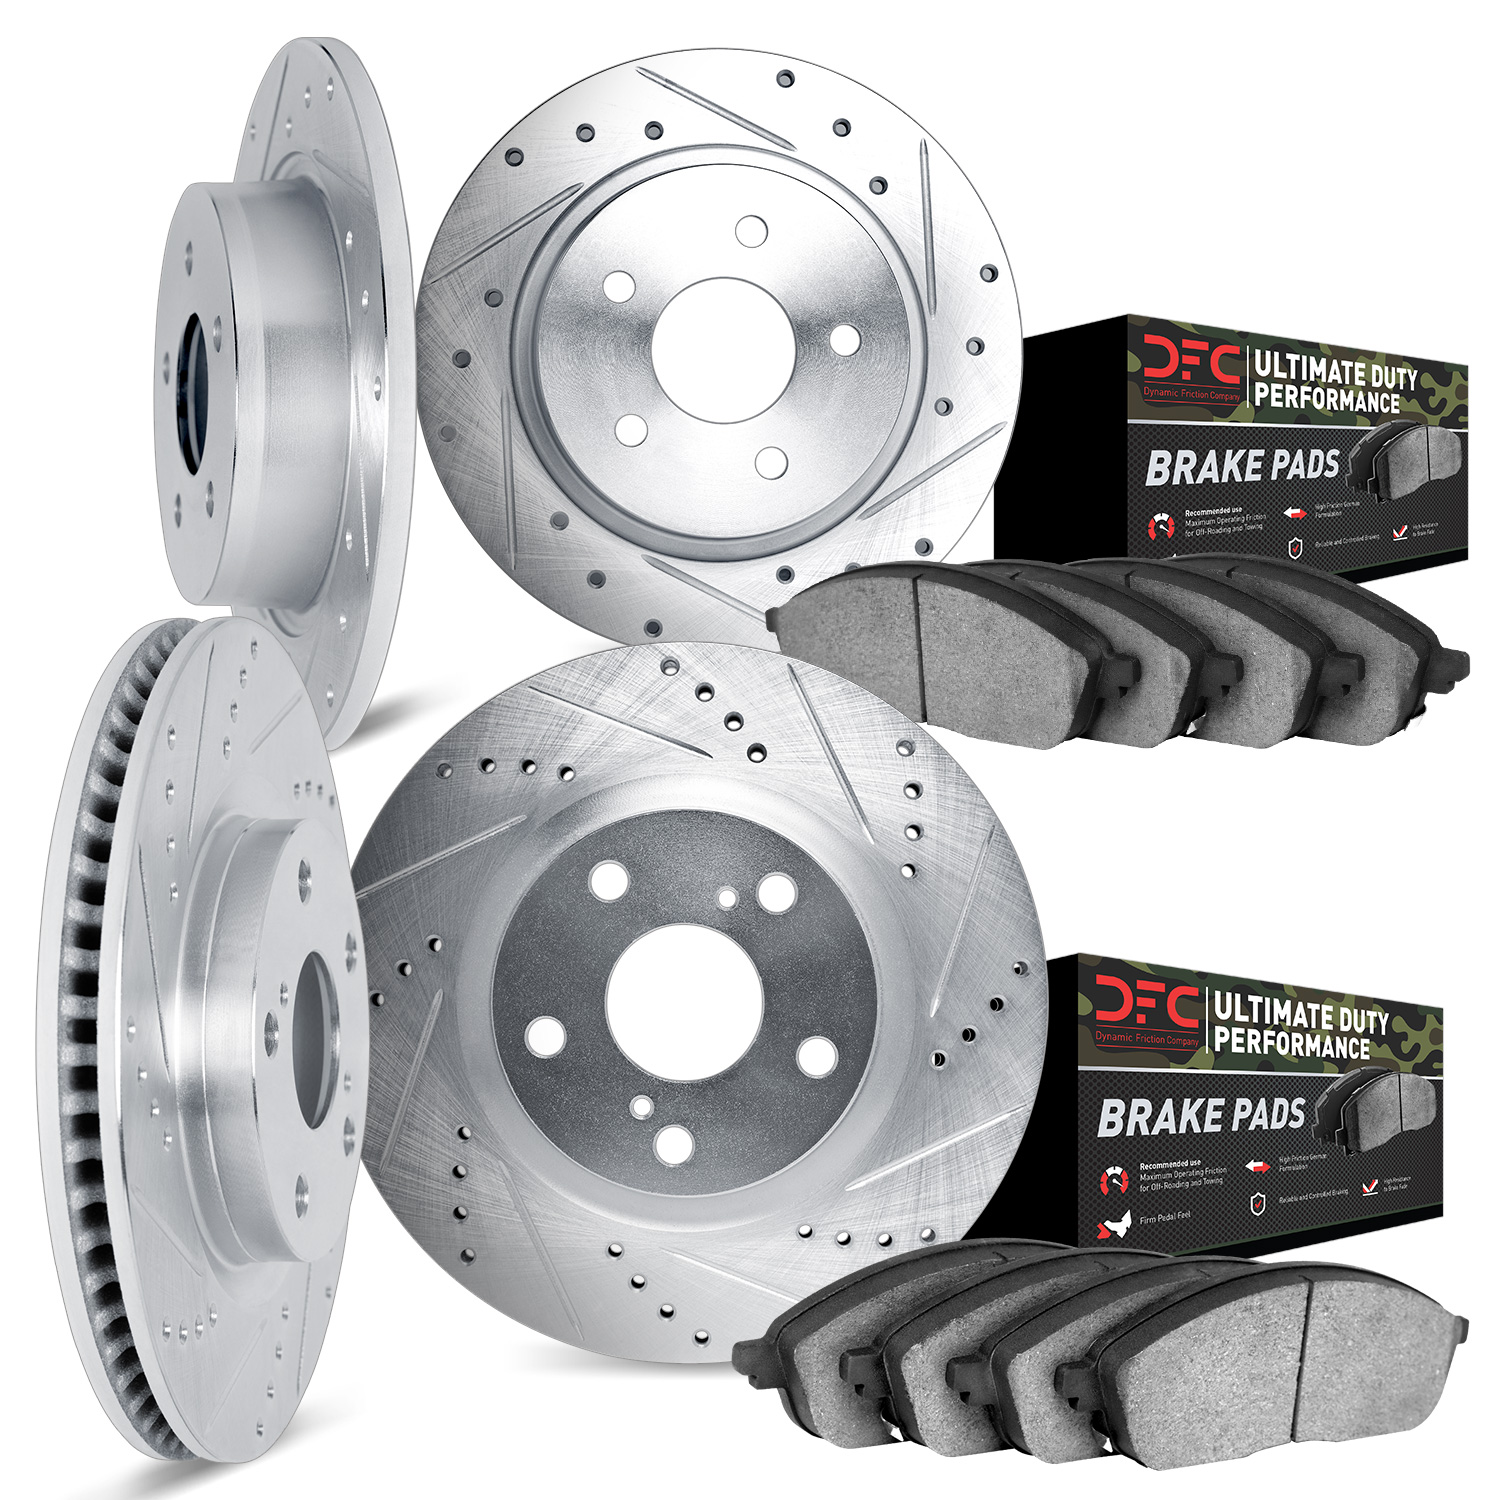 7404-54024 Drilled/Slotted Brake Rotors with Ultimate-Duty Brake Pads Kit [Silver], 2000-2004 Ford/Lincoln/Mercury/Mazda, Positi